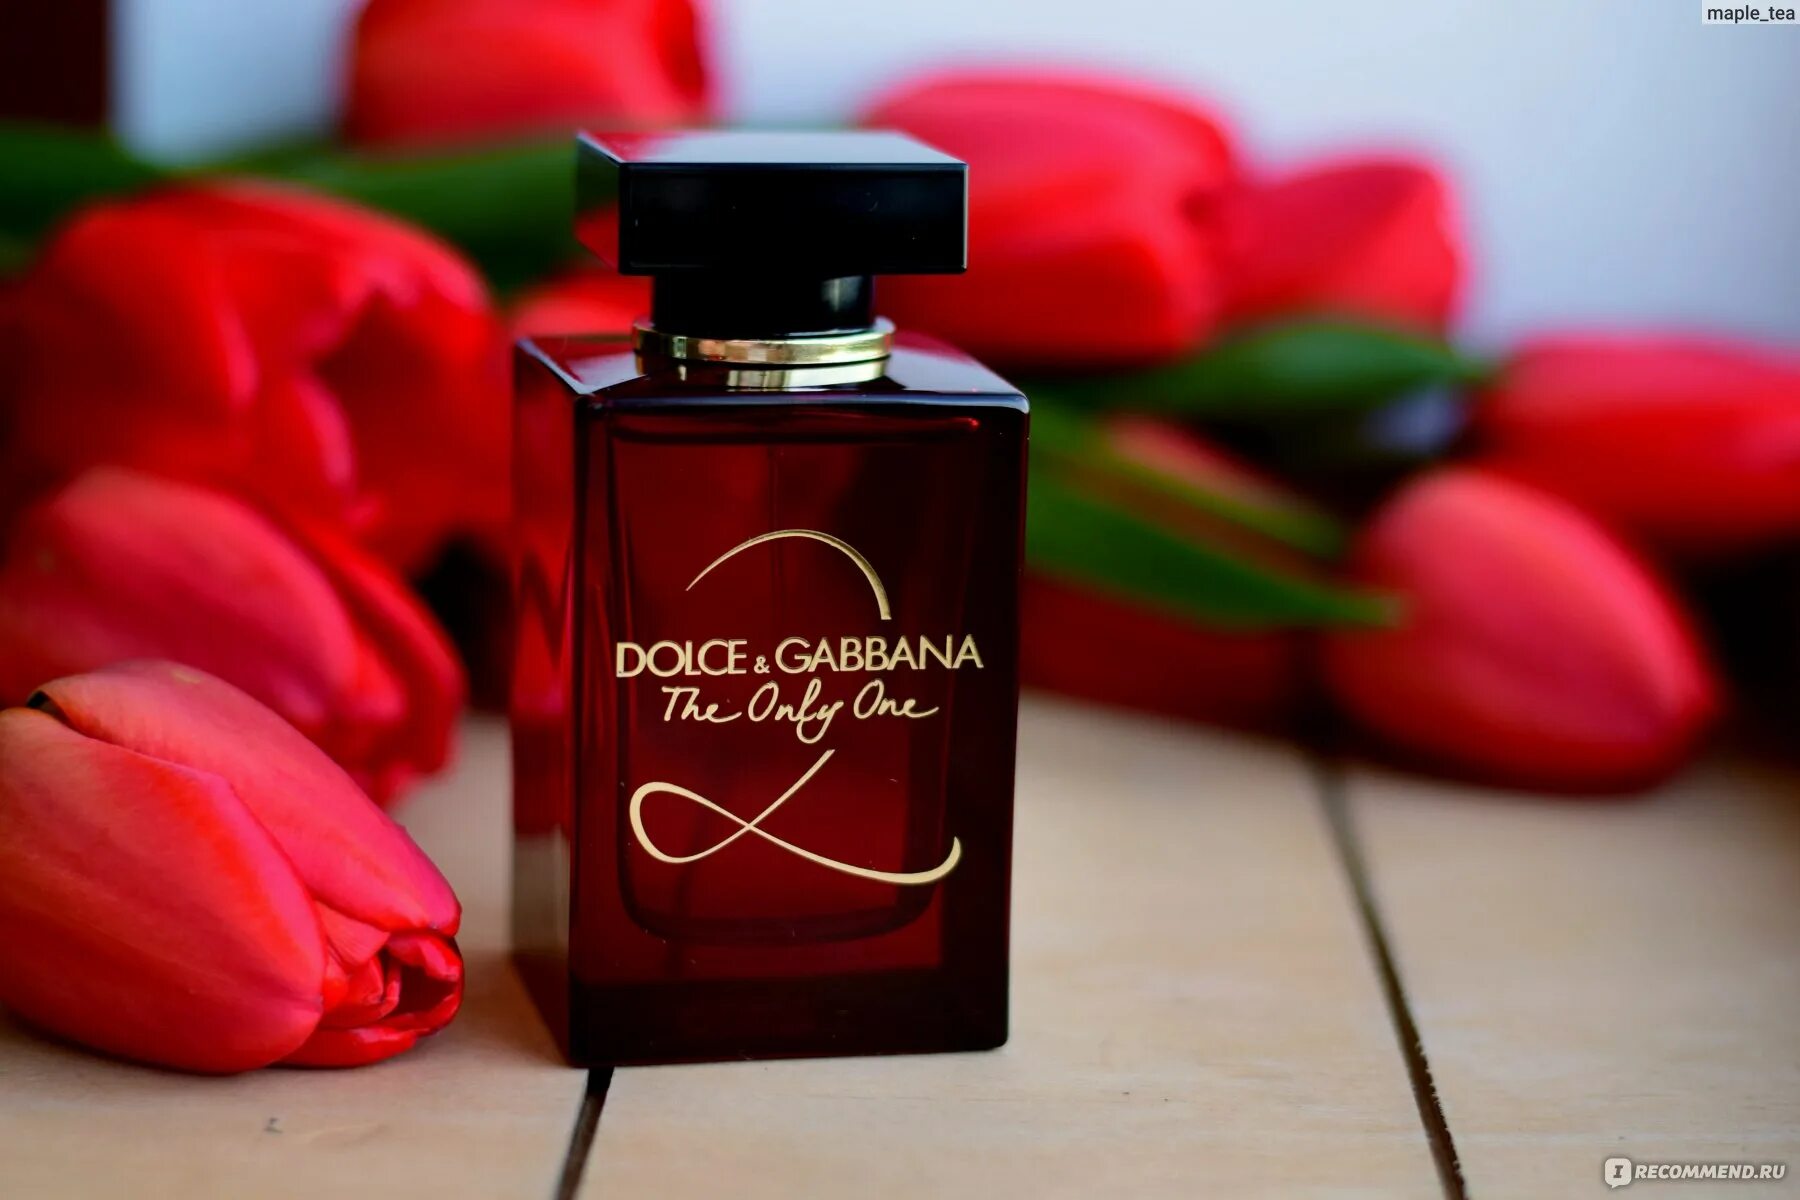 Dolce Gabbana the only one 2. Dolce Gabbana the only one intense женские. Аромат Dolce Gabbana the only one 2 красный. Дольче Габбана the only one женские черные. Gabbana the only one женские